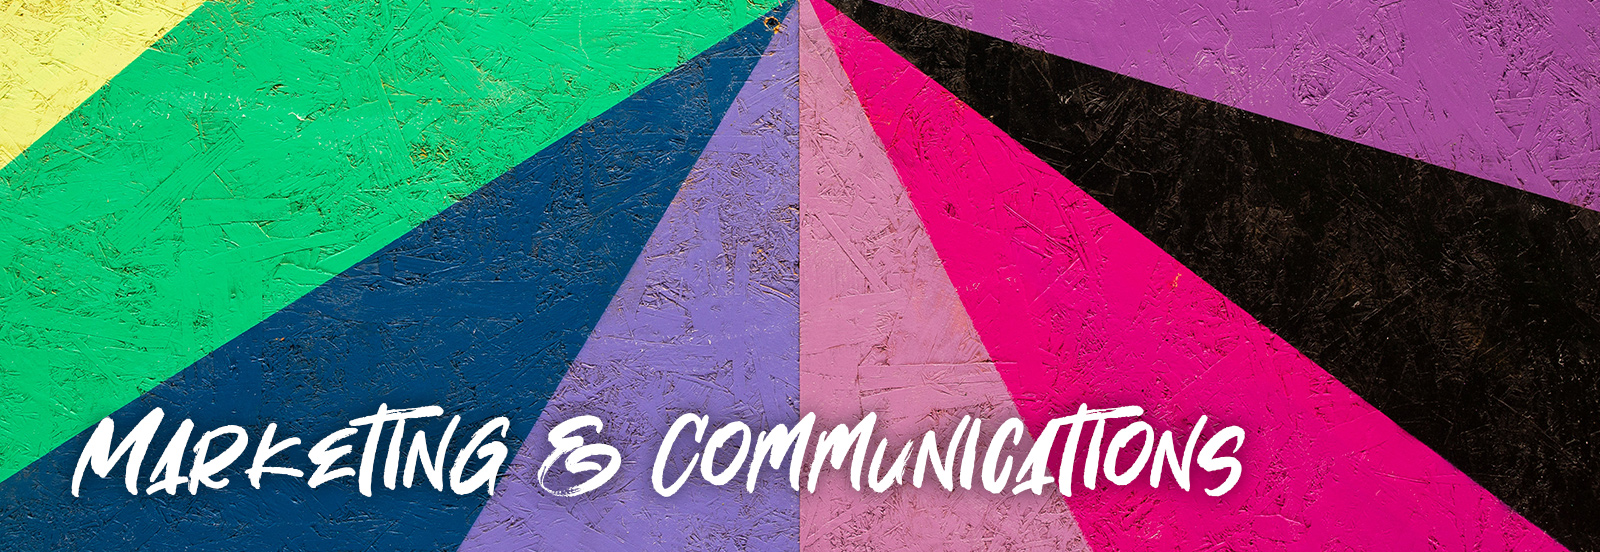 Marketing and Communications written on a multicolored background